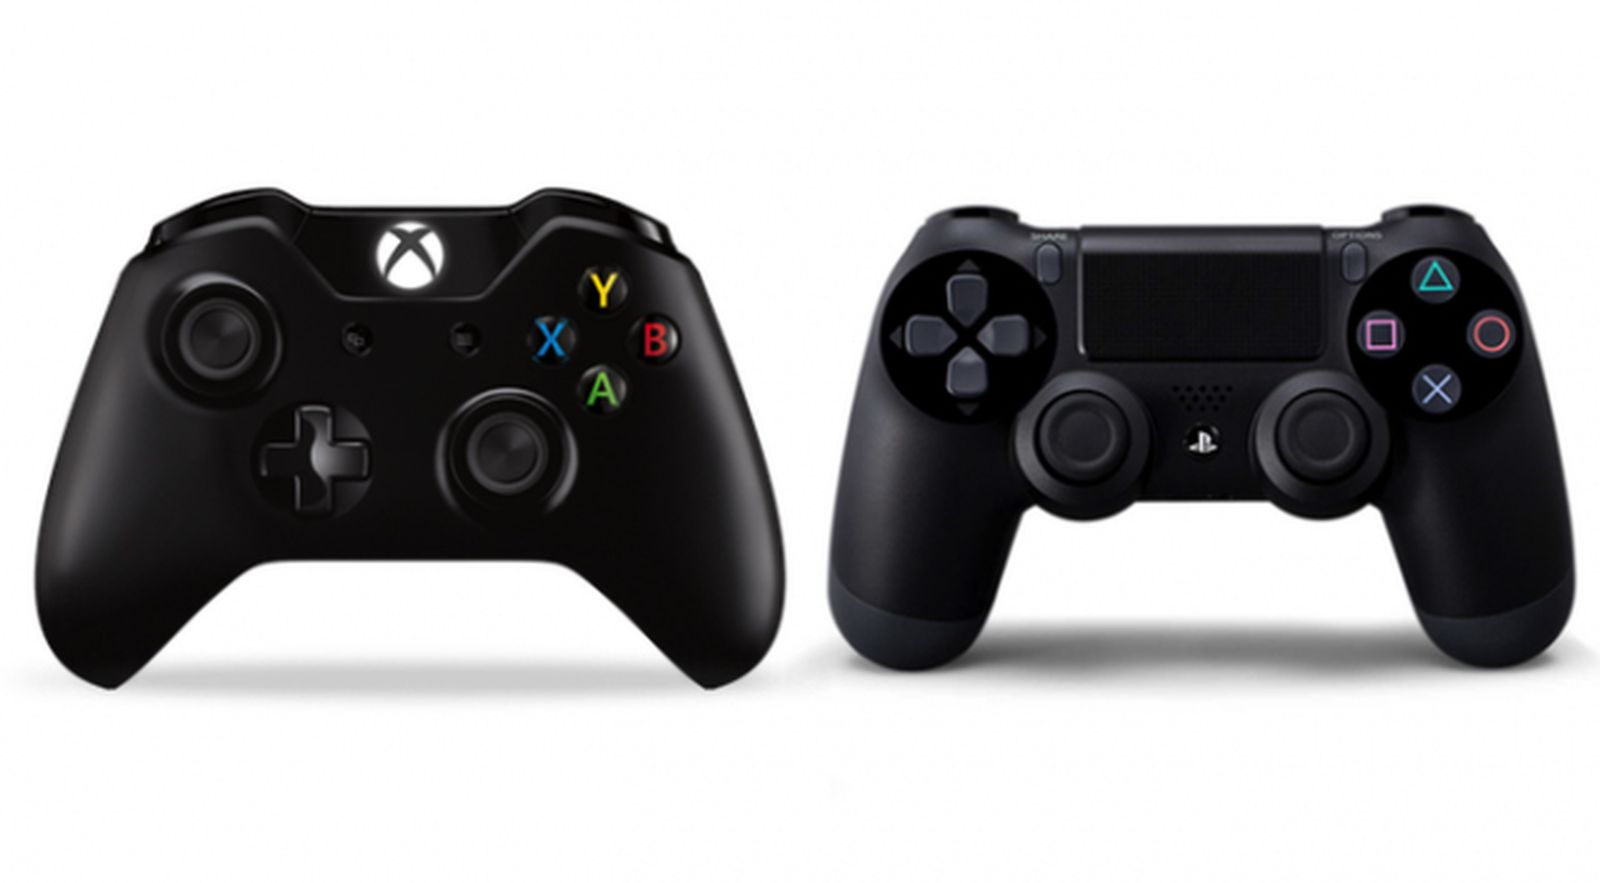 Which Is Better: Xbox One or PlayStation 4?